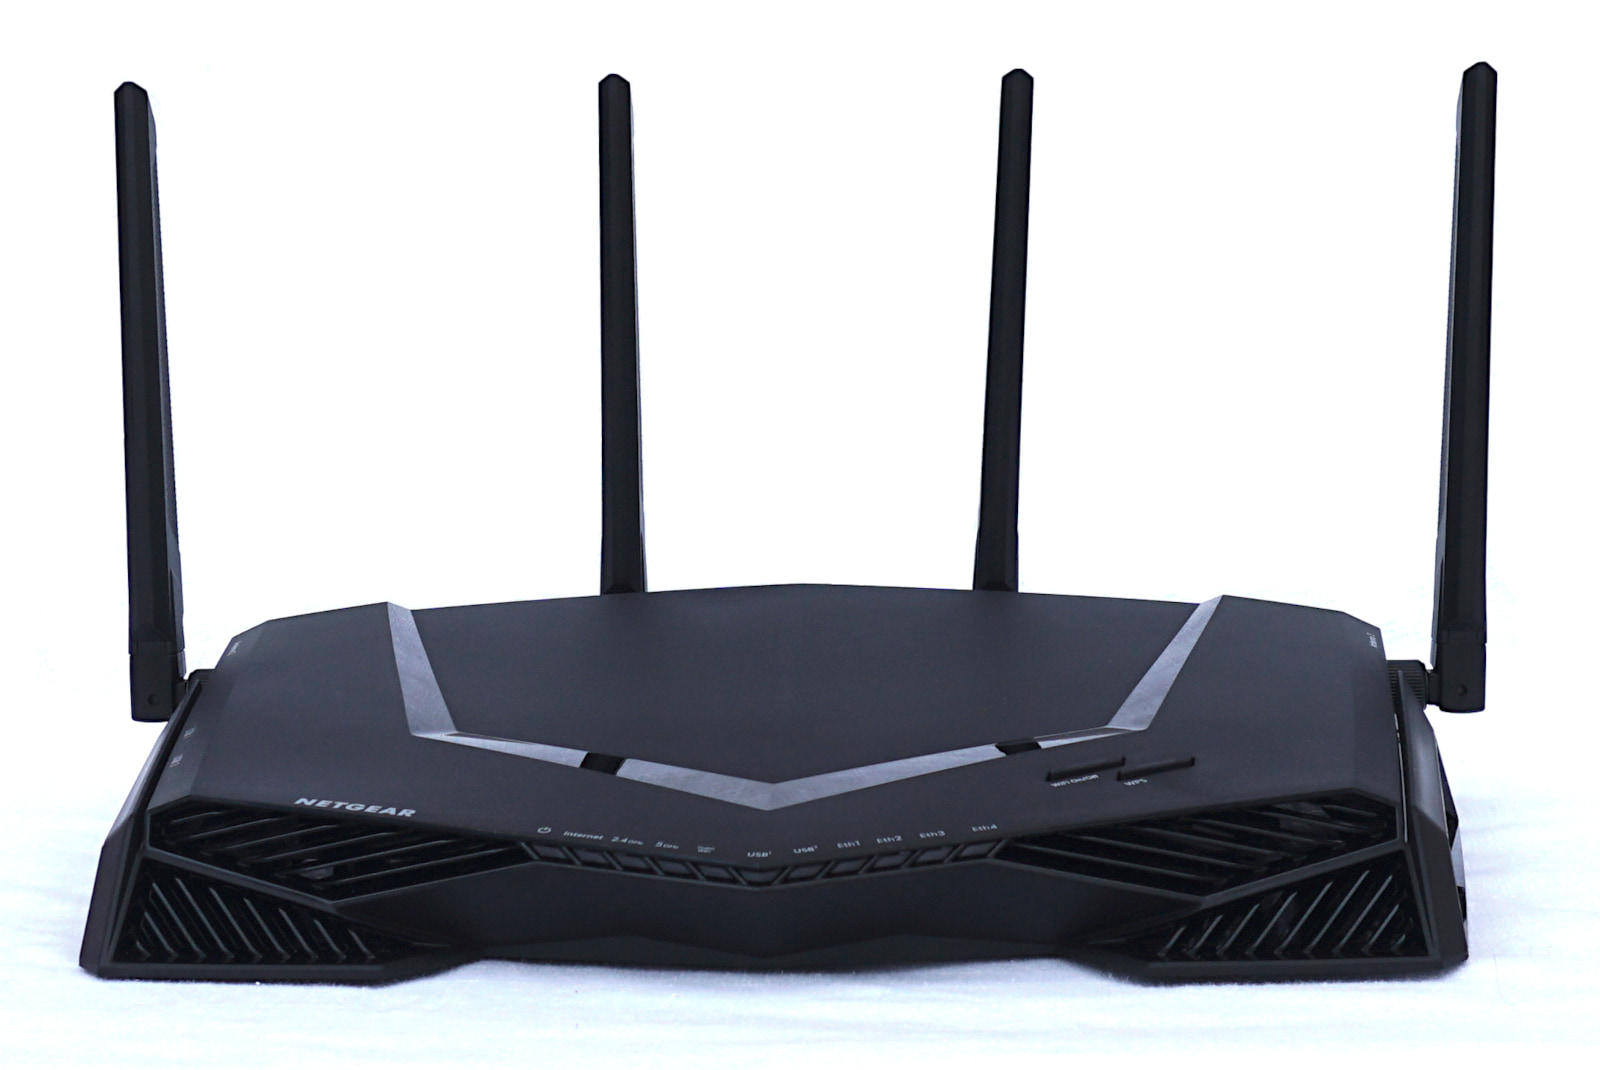 NETGEAR Nighthawk XR500 Review: Our Testing and Comparison